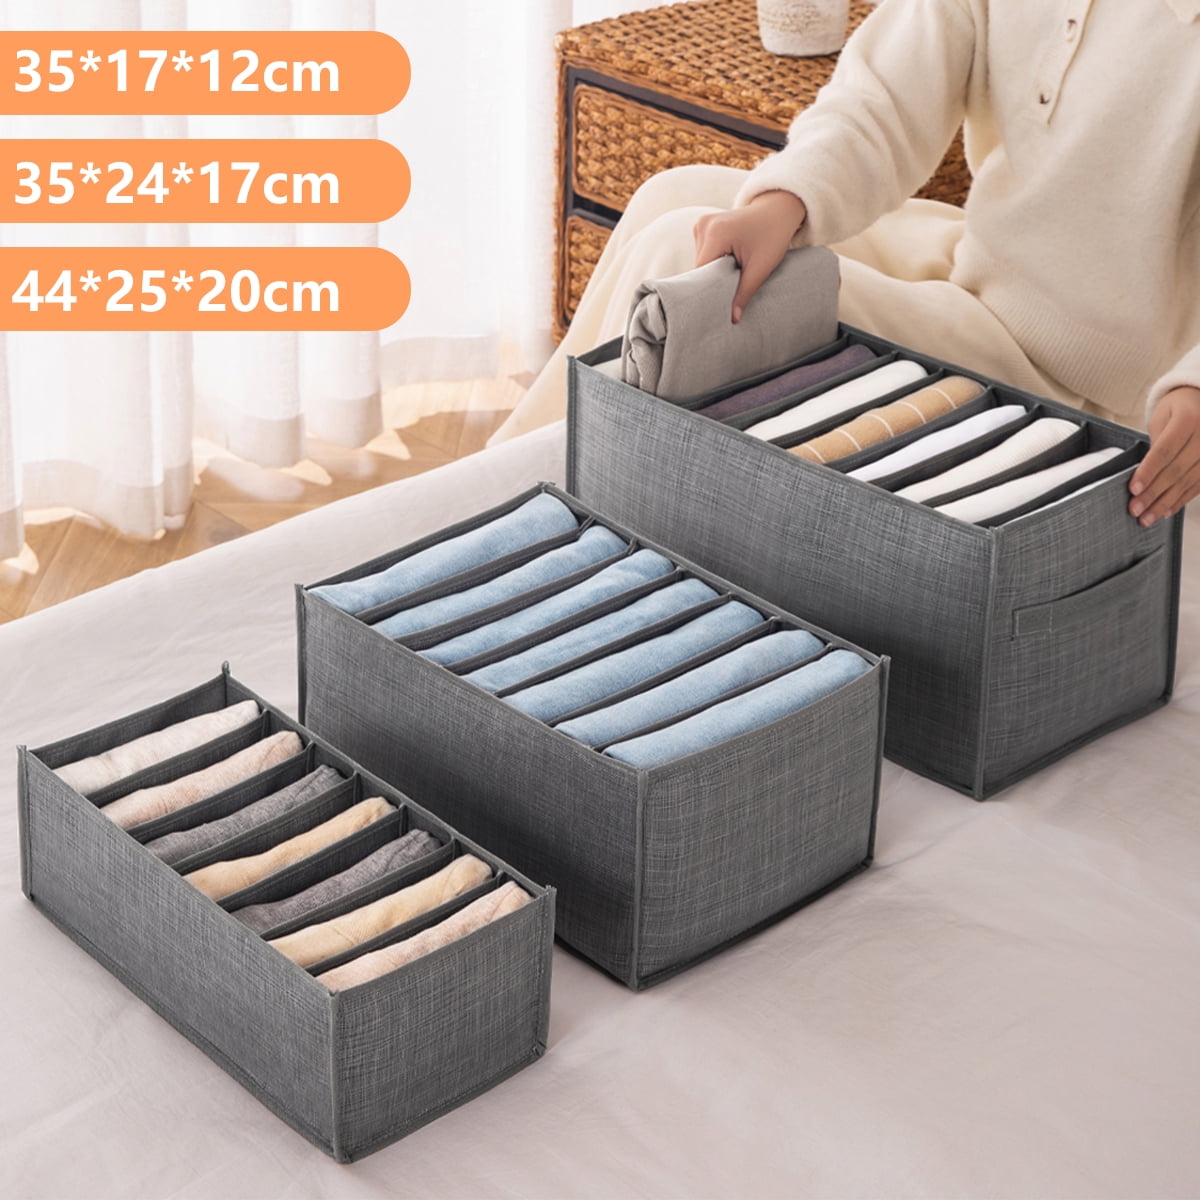 Jeans Clothes Compartment Storage Box Closet Wardrobe Drawer Divider  Container